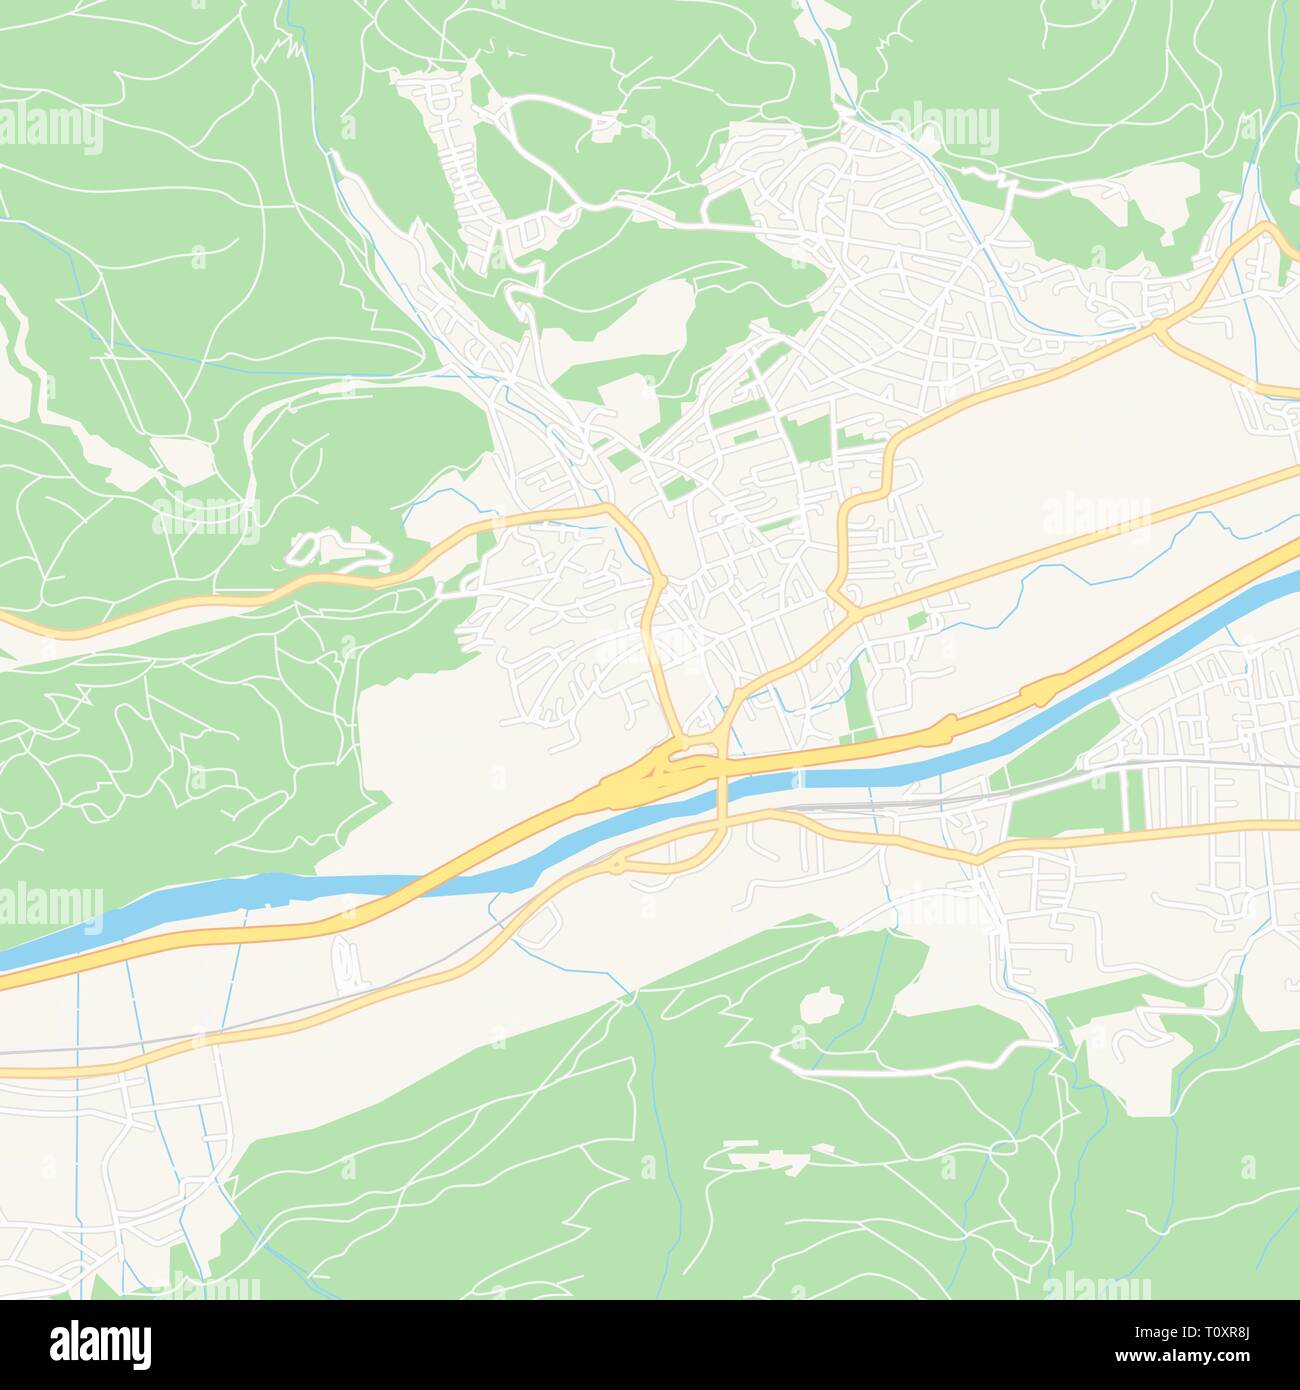 Printable map of Telfs, Austria with main and secondary roads and larger railways. This map is carefully designed for routing and placing individual d Stock Vector